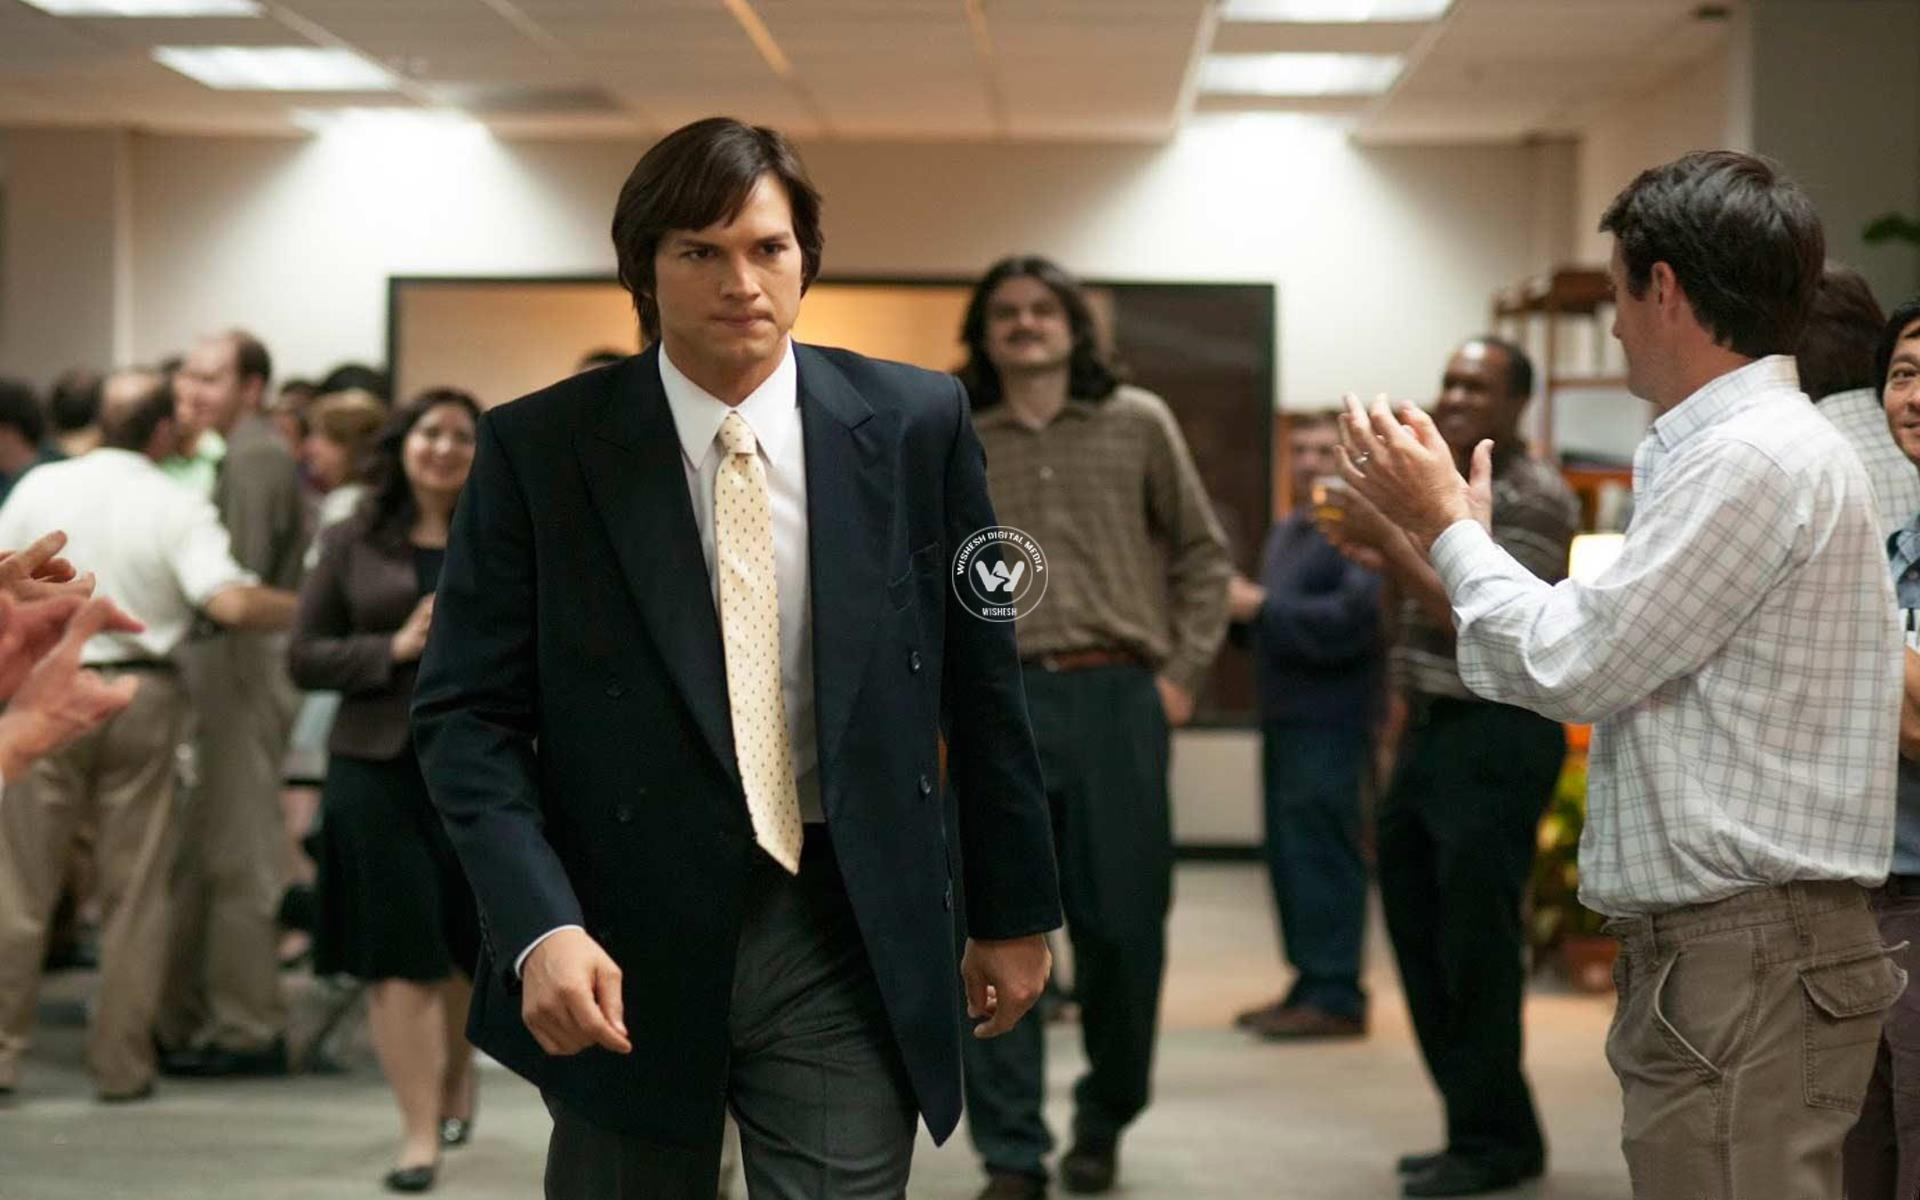 wallpapers of jobs movie | images of hollywood movie jobs. | Wallpaper 1of 4 | Jobs